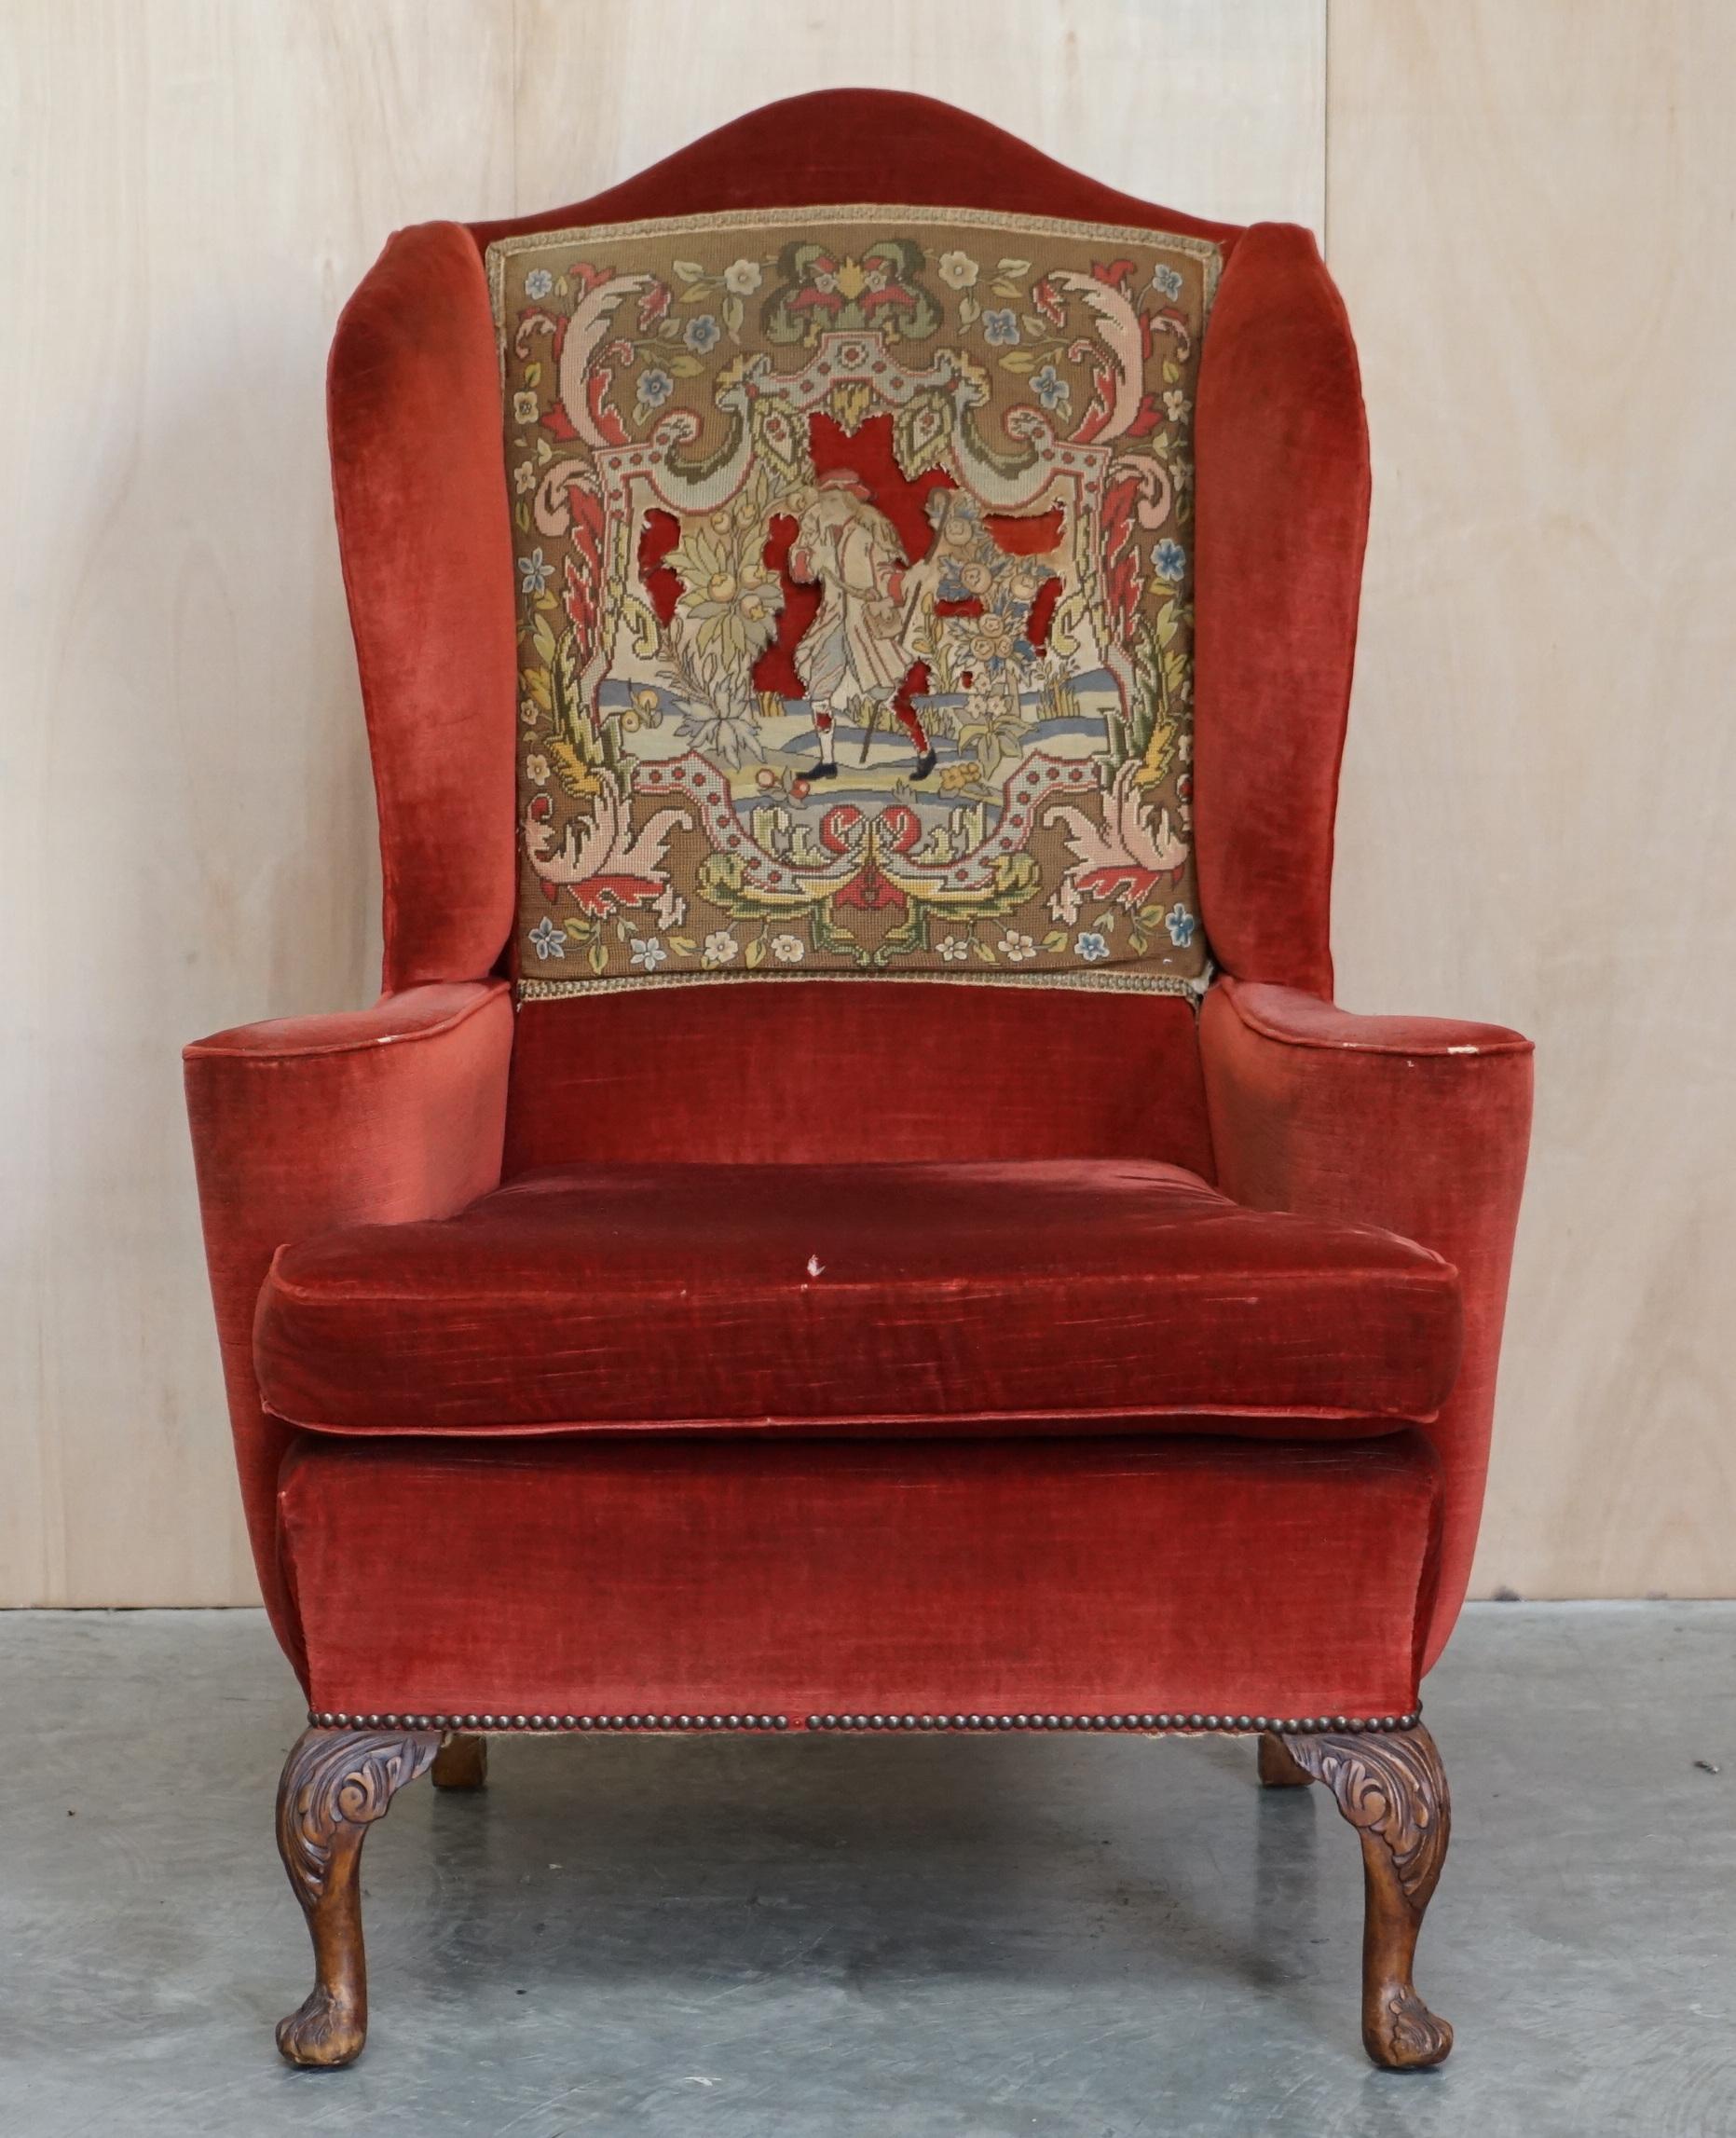 We are delighted to offer for sale this lovely Victorian Walnut framed Velour wingback armchair with ornately carved legs and original embroidery with William Morris flat top arms.

A very nicely made and decorative wingback, it has lovely hand